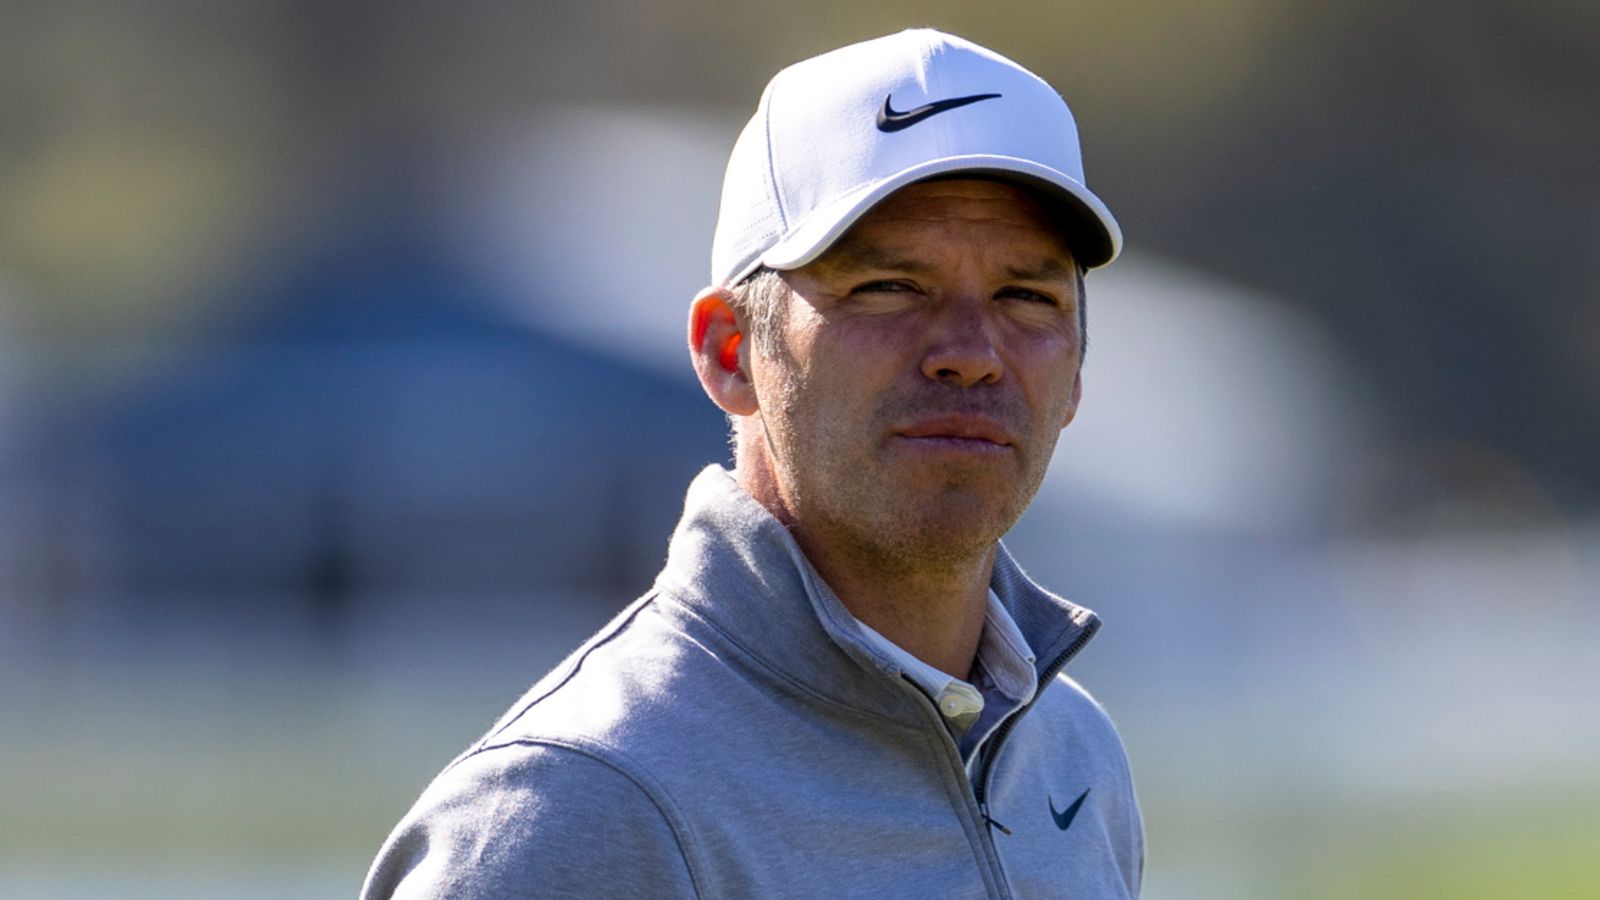 Paul Casey withdraws from US Open as his back injury continues to trouble him